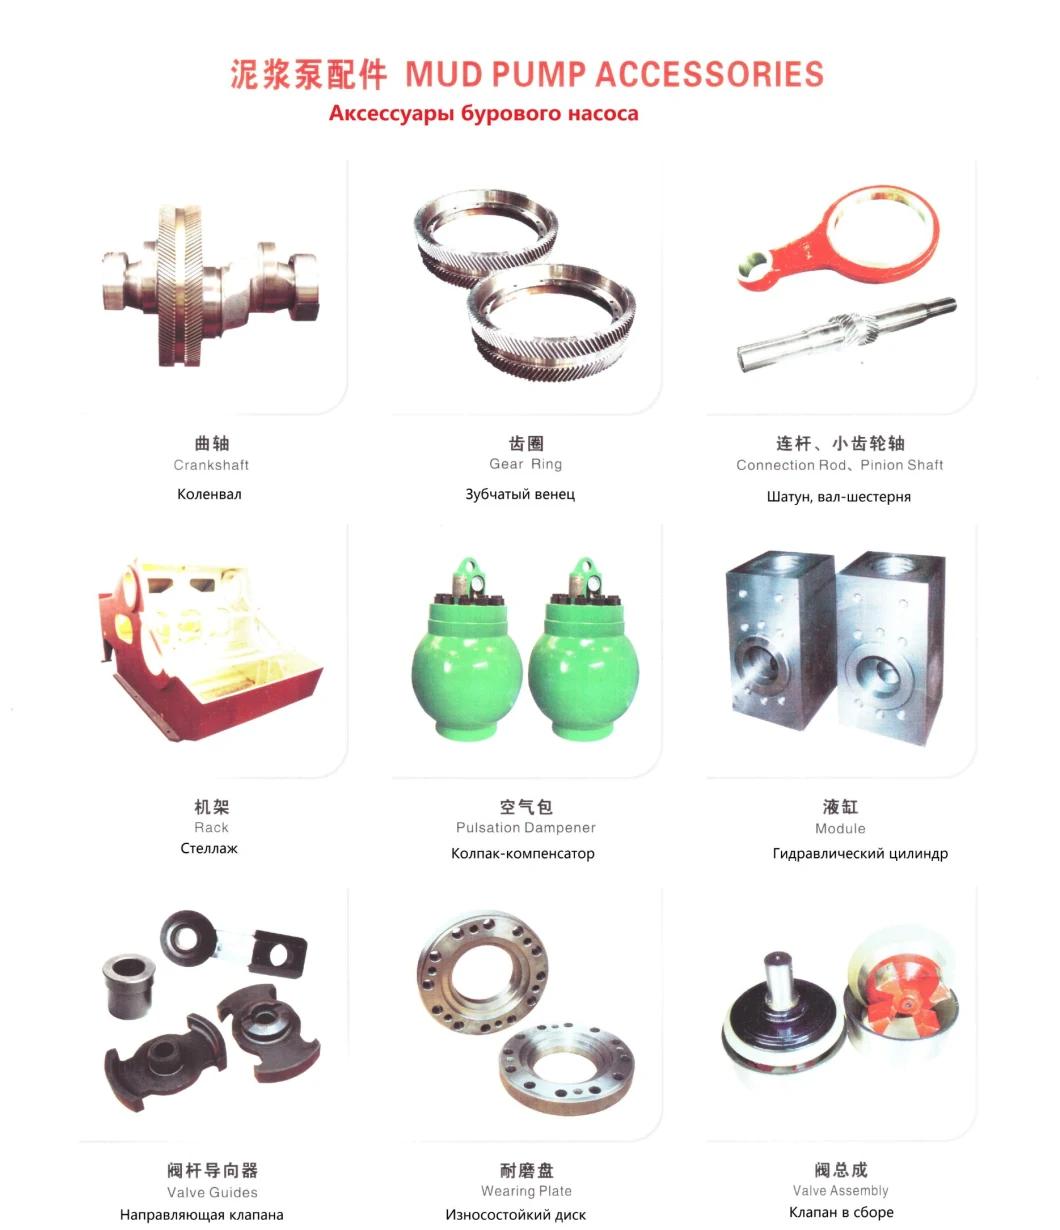 Mud Pump Accessories for Sale